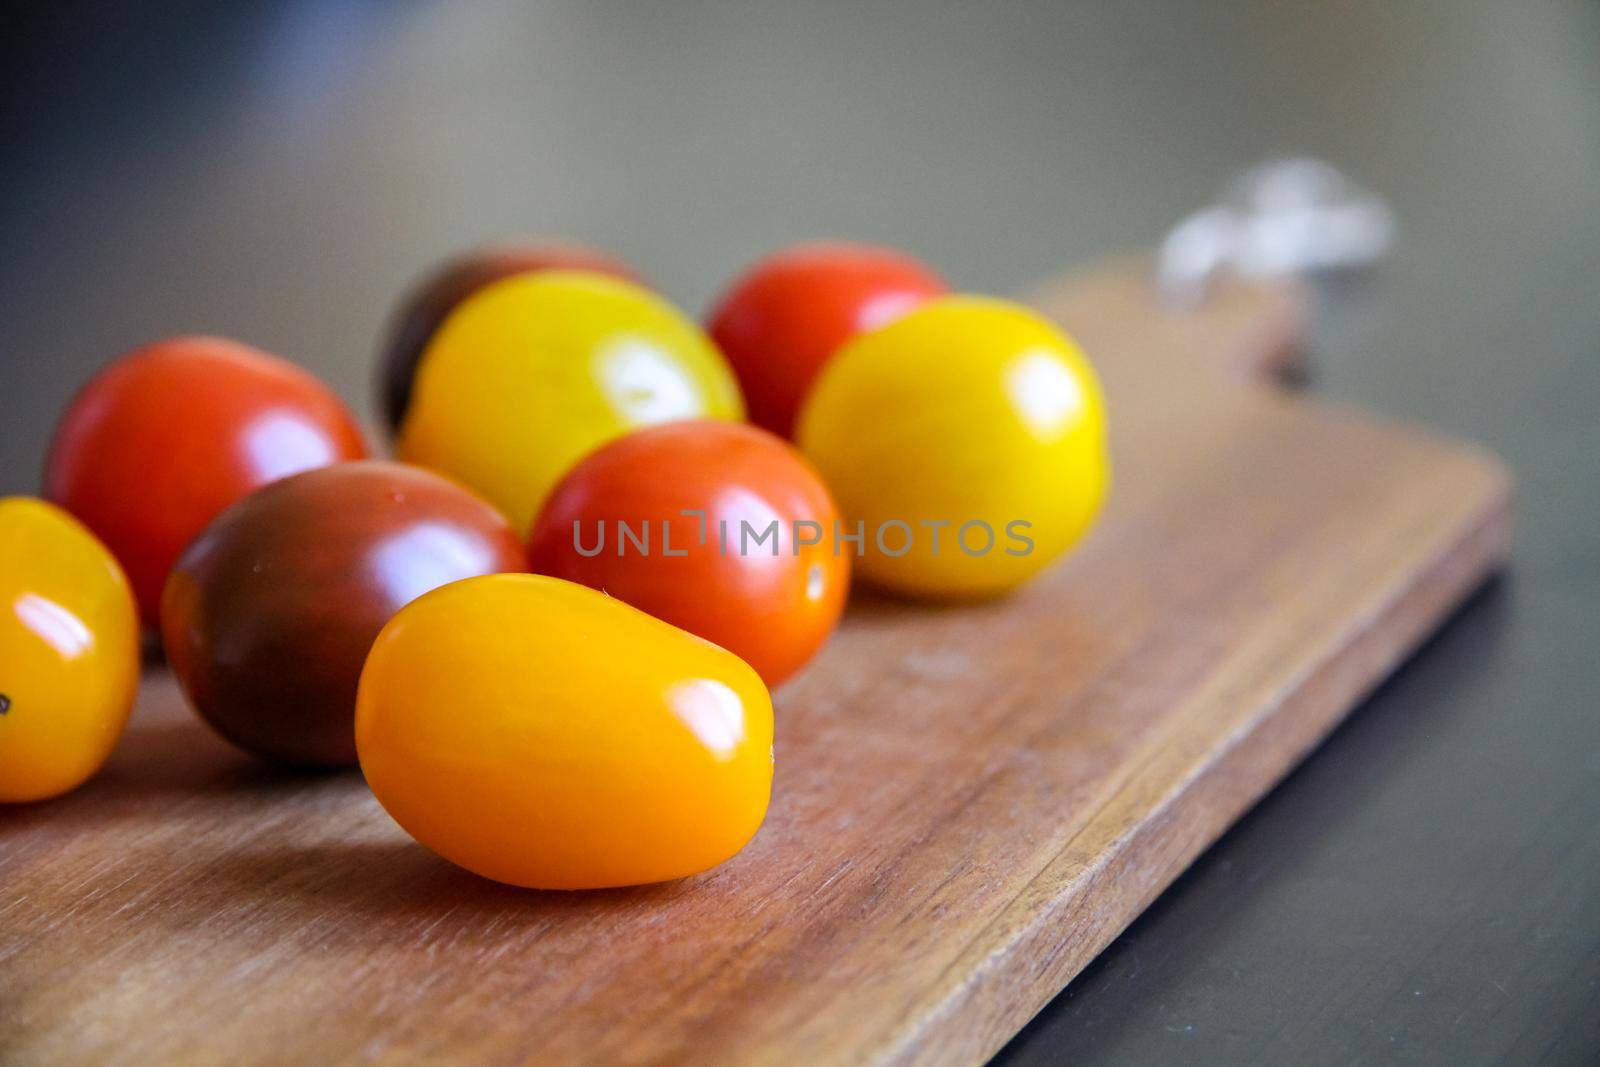 Cocktail tomatoes on a cutting board by daboost